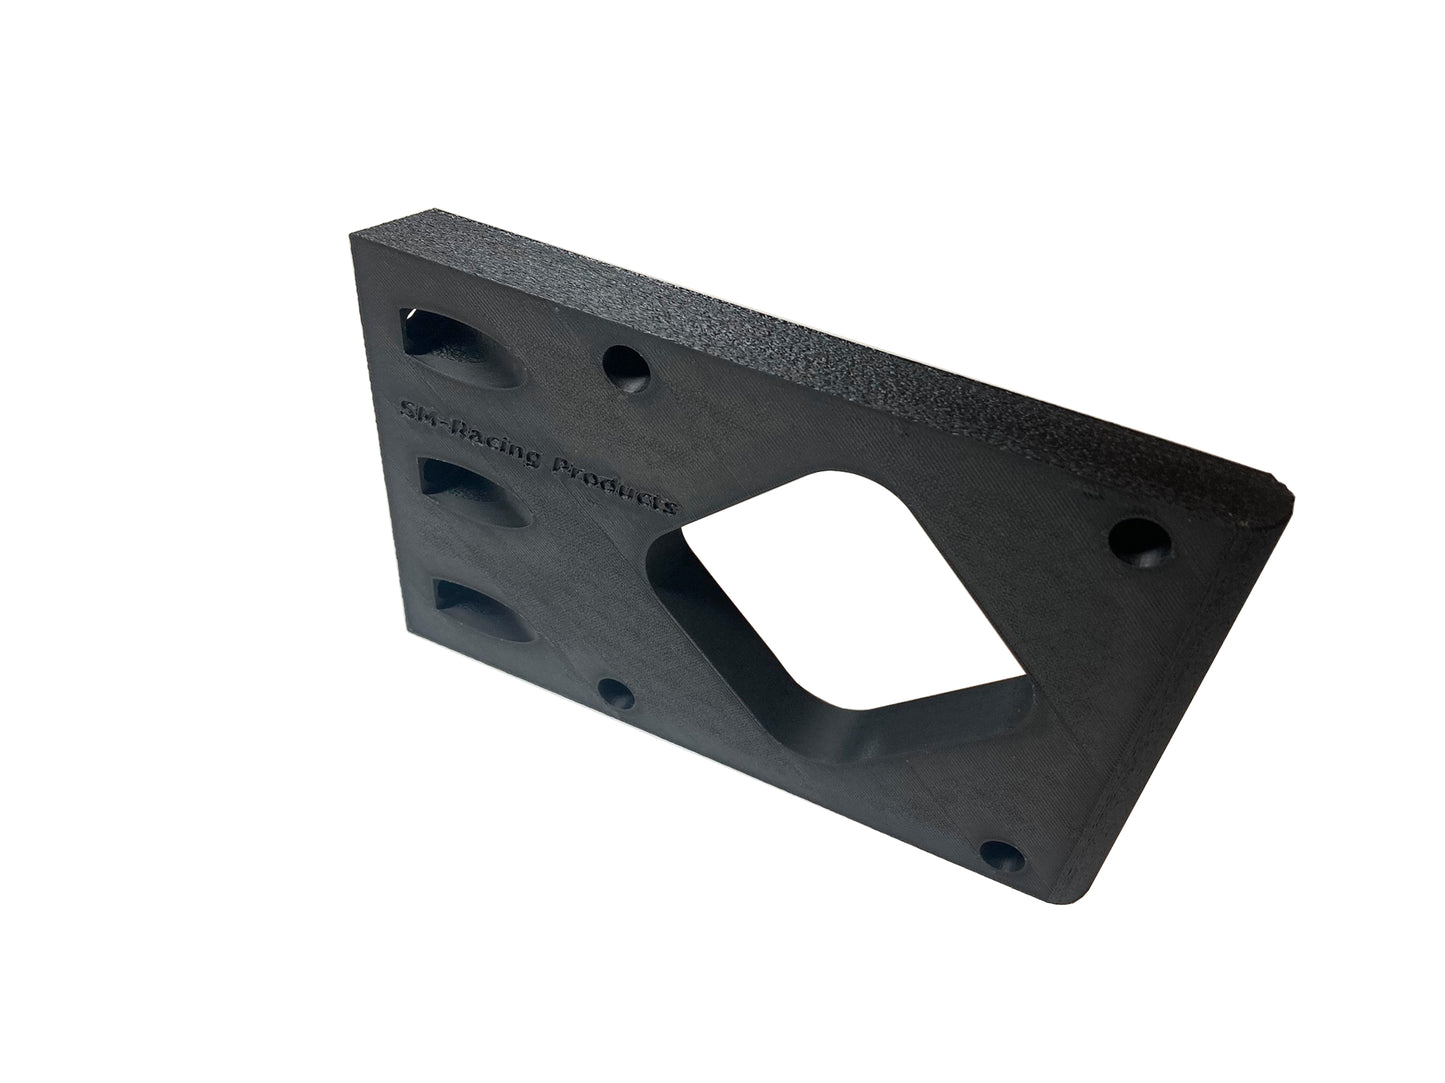 Side Mounting Plate for Aluminum Extrusion to VESA